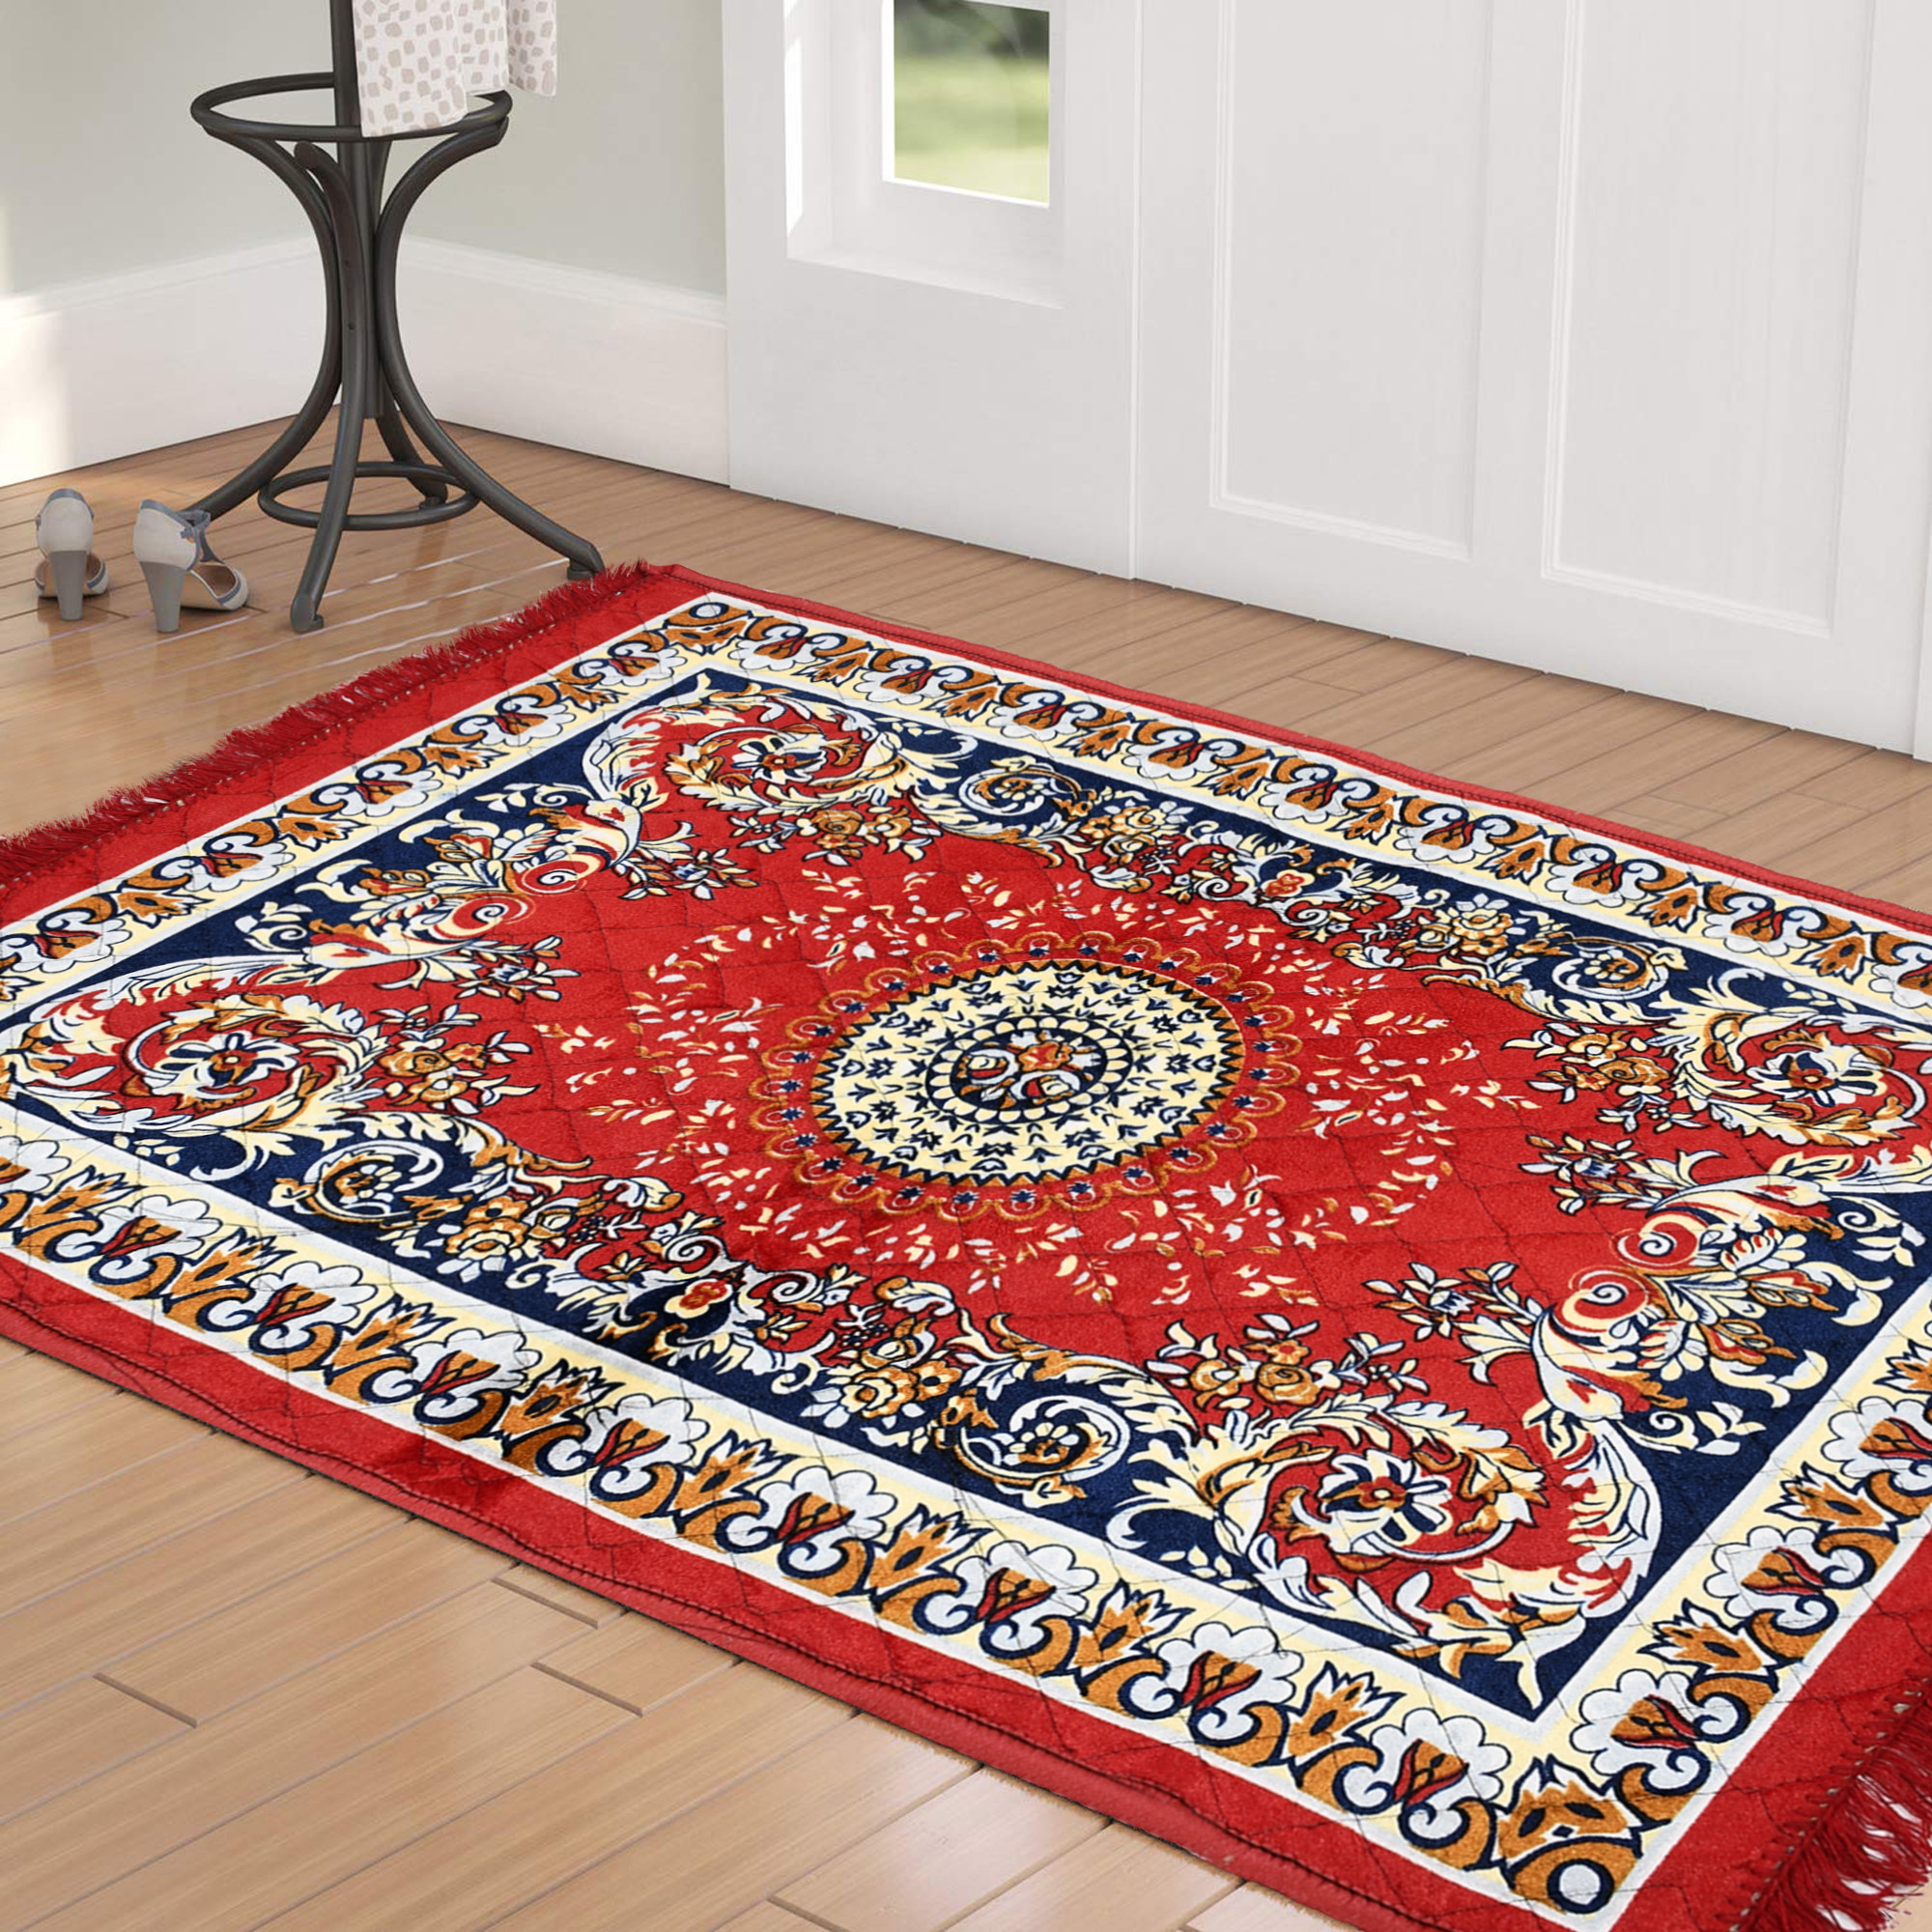 Kuber Industries Super Soft Area Rugs Silky Smooth Bedroom Mats for Living Room Kids Room Baby Room Dormitory Home Decor Carpet-4 x 2 Feet (Red)